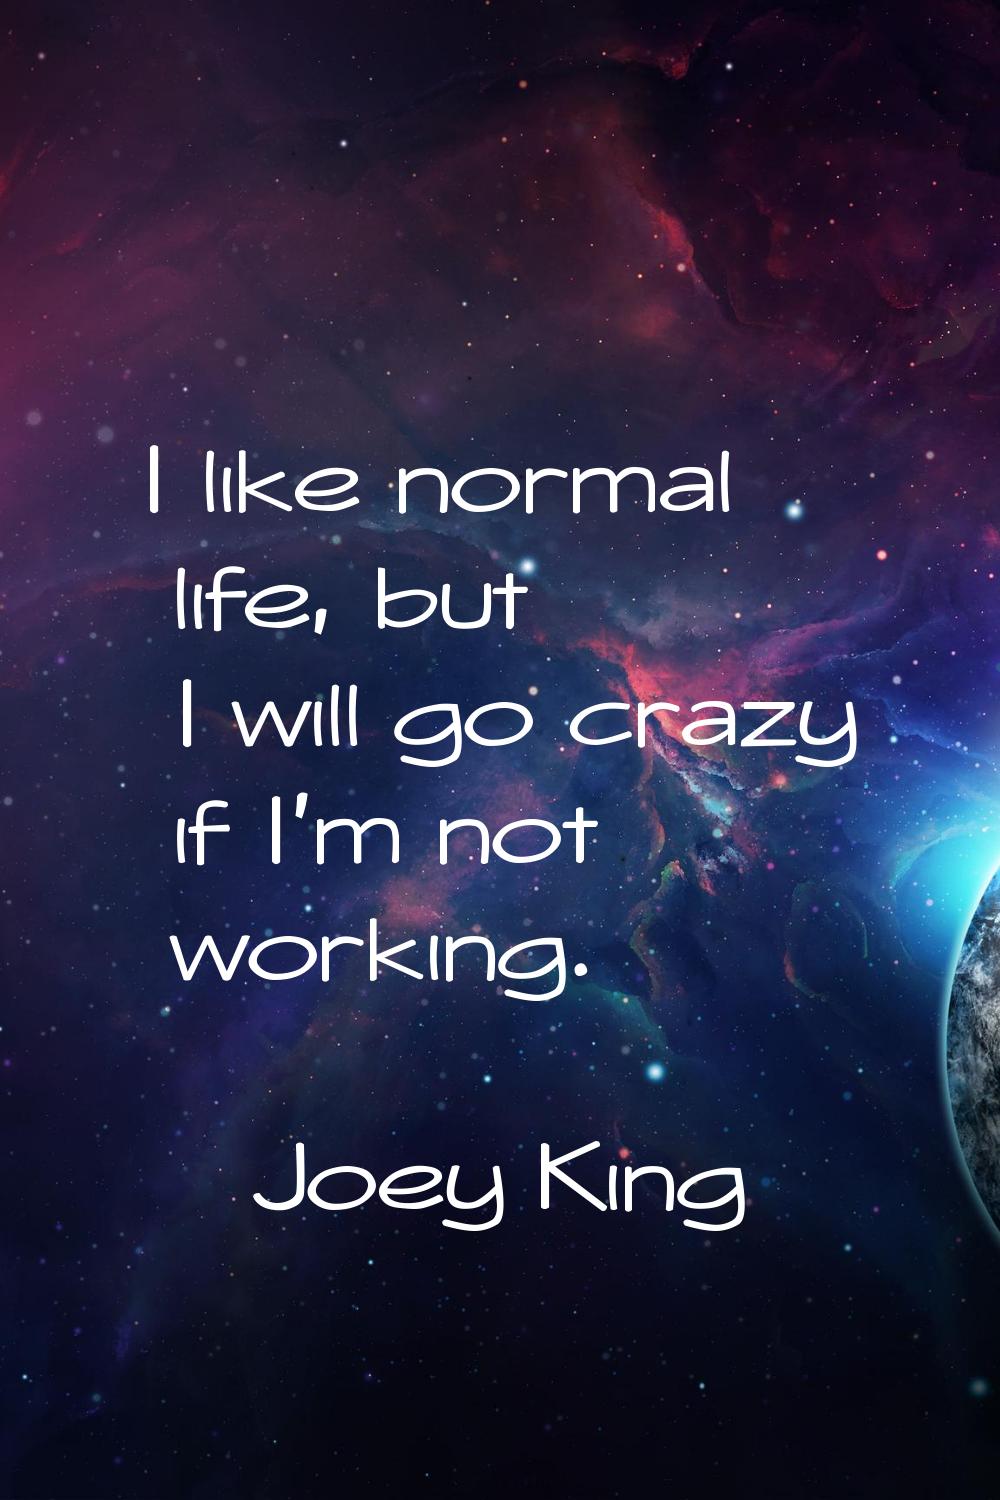 I like normal life, but I will go crazy if I'm not working.